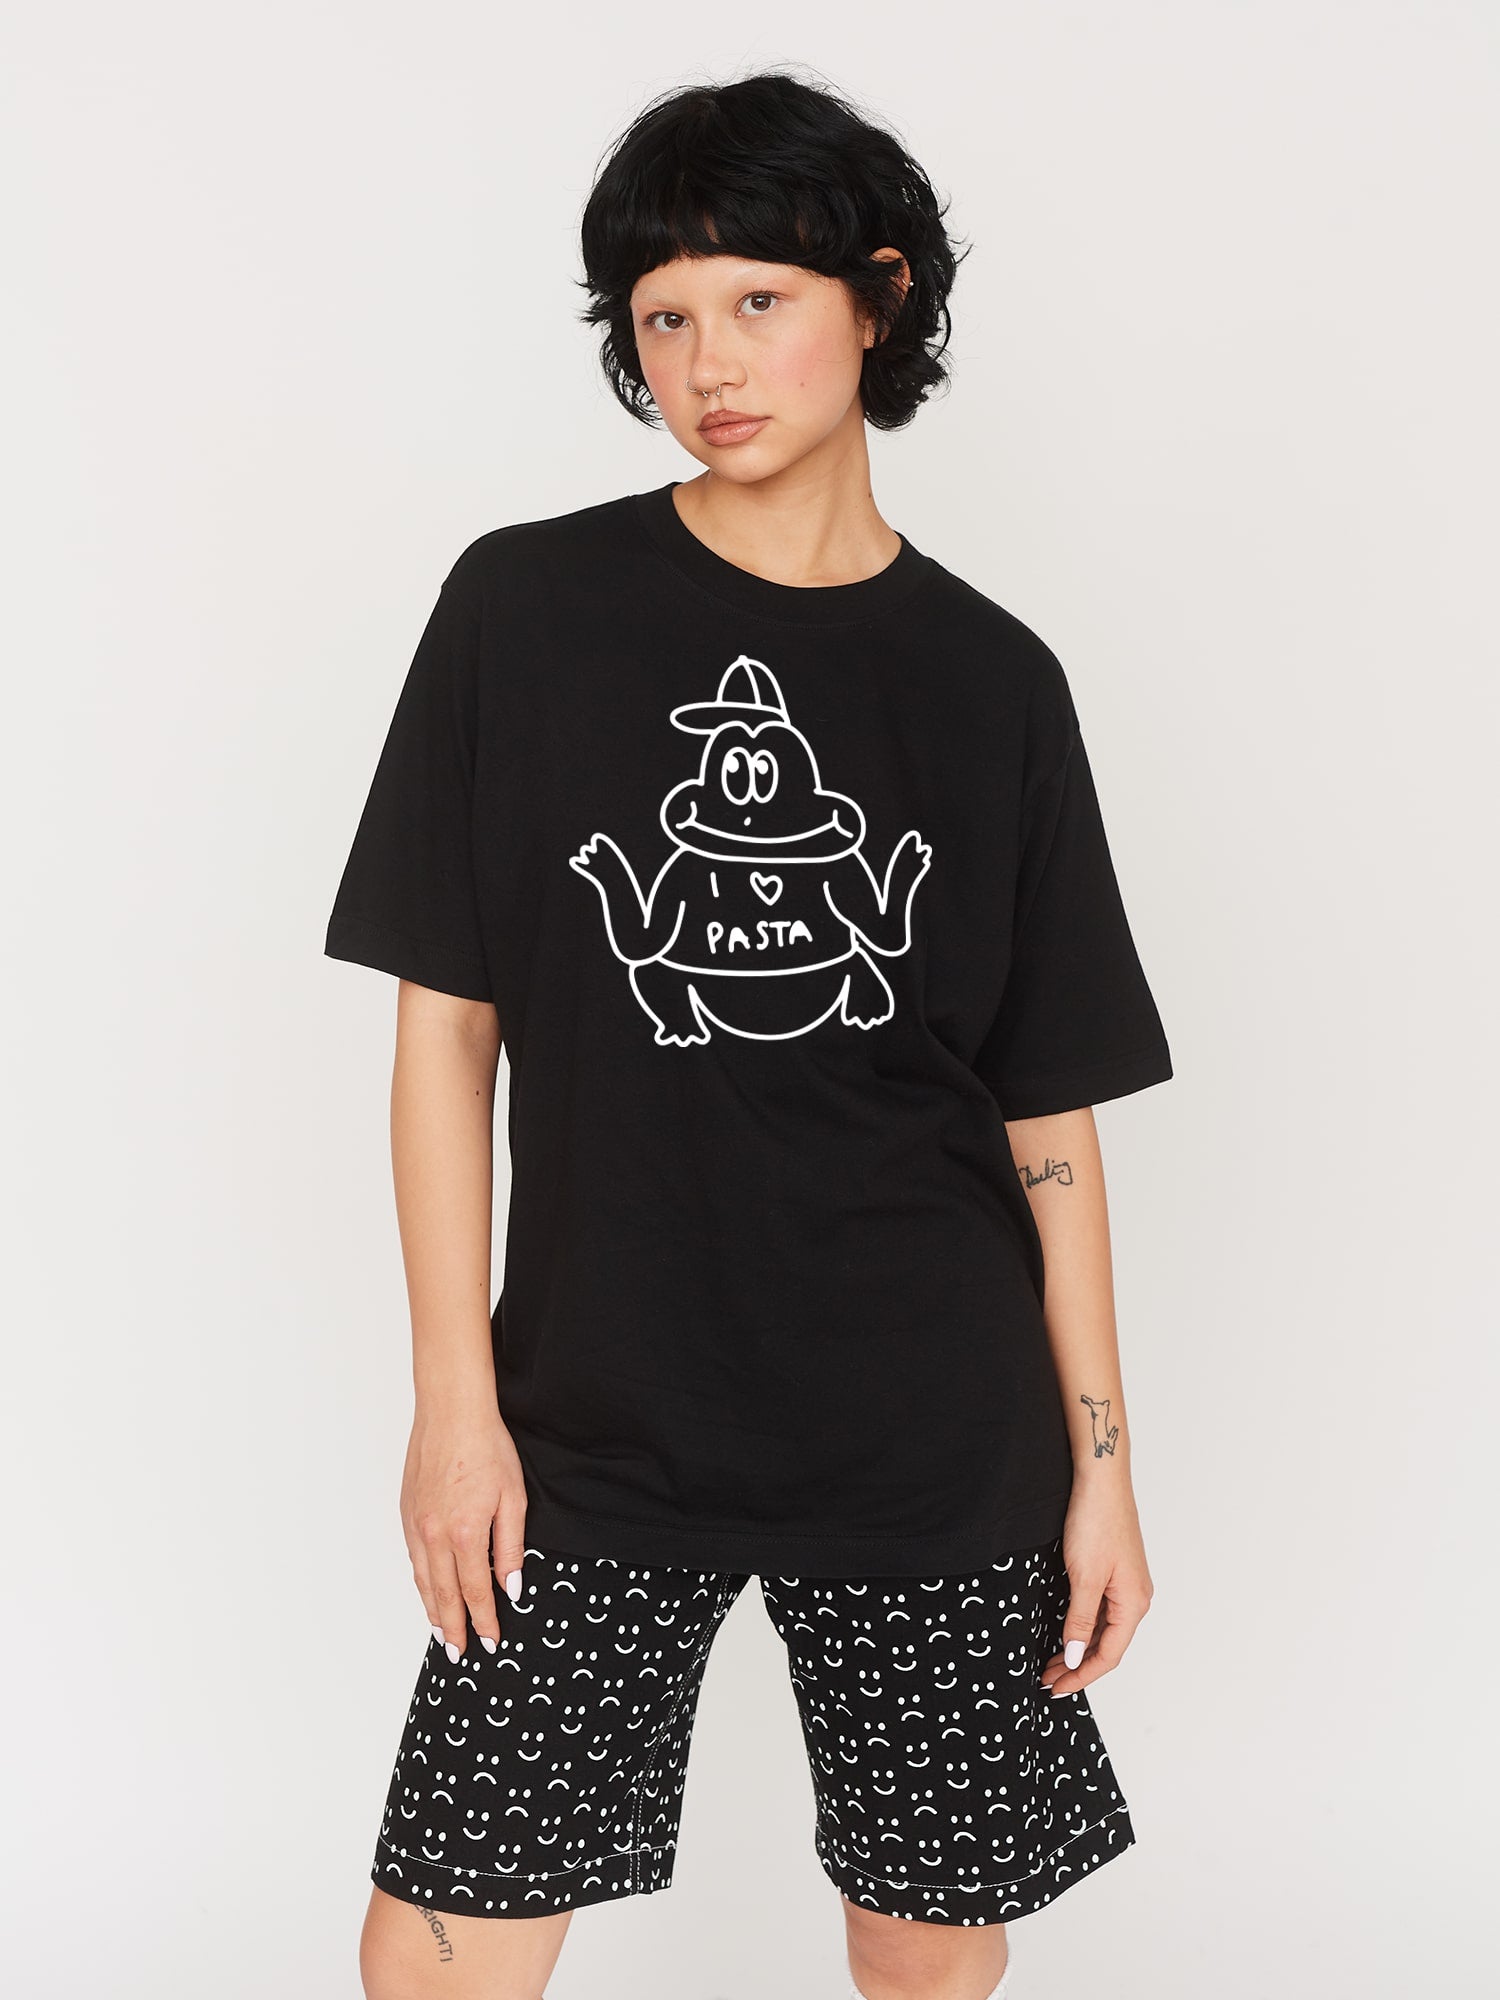 Unisex T-Shirts | All Tops & Tees | Lazy Oaf